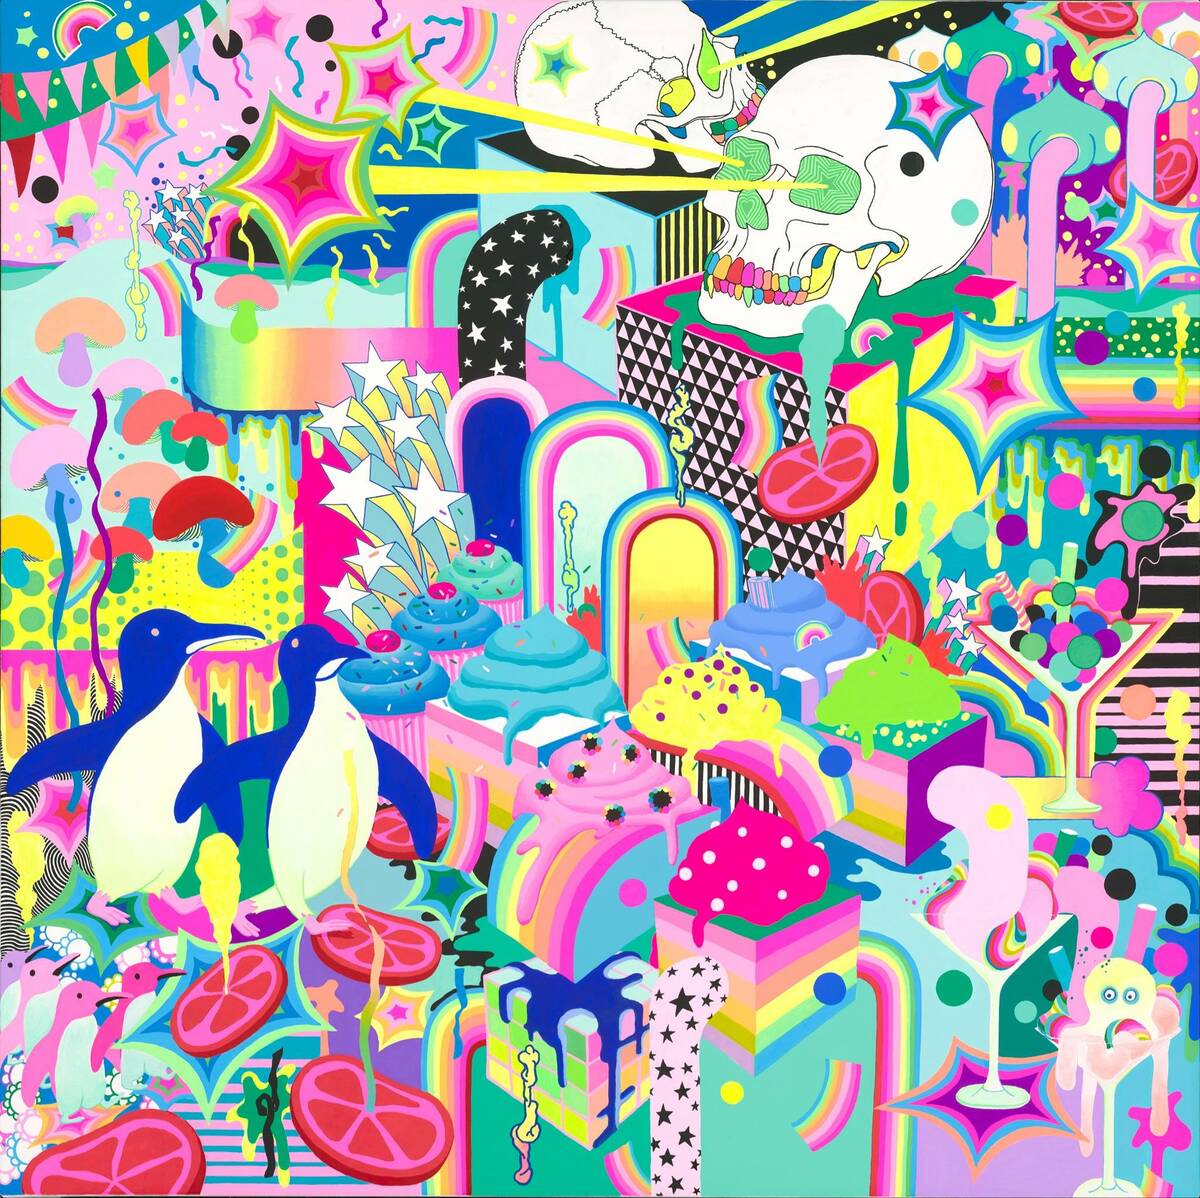 "Psycho Pop Party" by Adehla Lee will be displayed at Superfrico, which opens alongside "Opium" ...